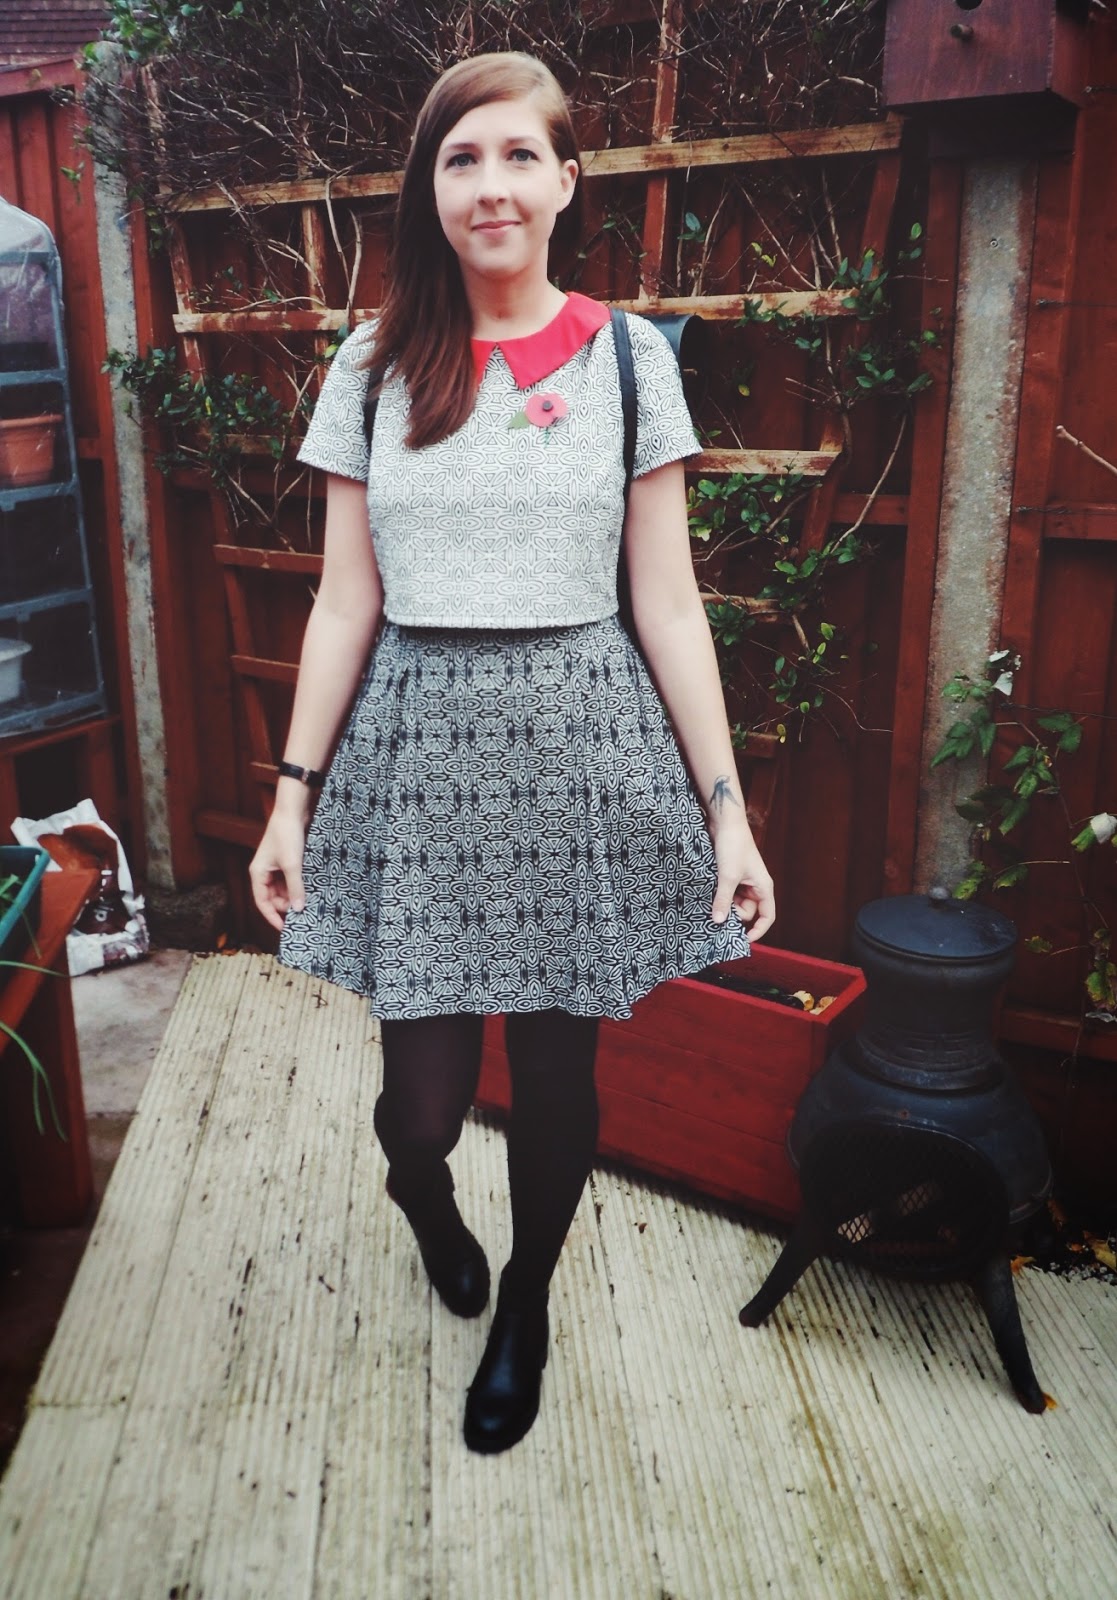 fbloggers, fblogger, fashion, fashionbloggers, wiw, ootd, outfitoftheday, lotd, lookoftheday, whatimwearing, whatibought, primark, asos, boots, peterpancollar, remembrancesunday, poppy, asseenonme